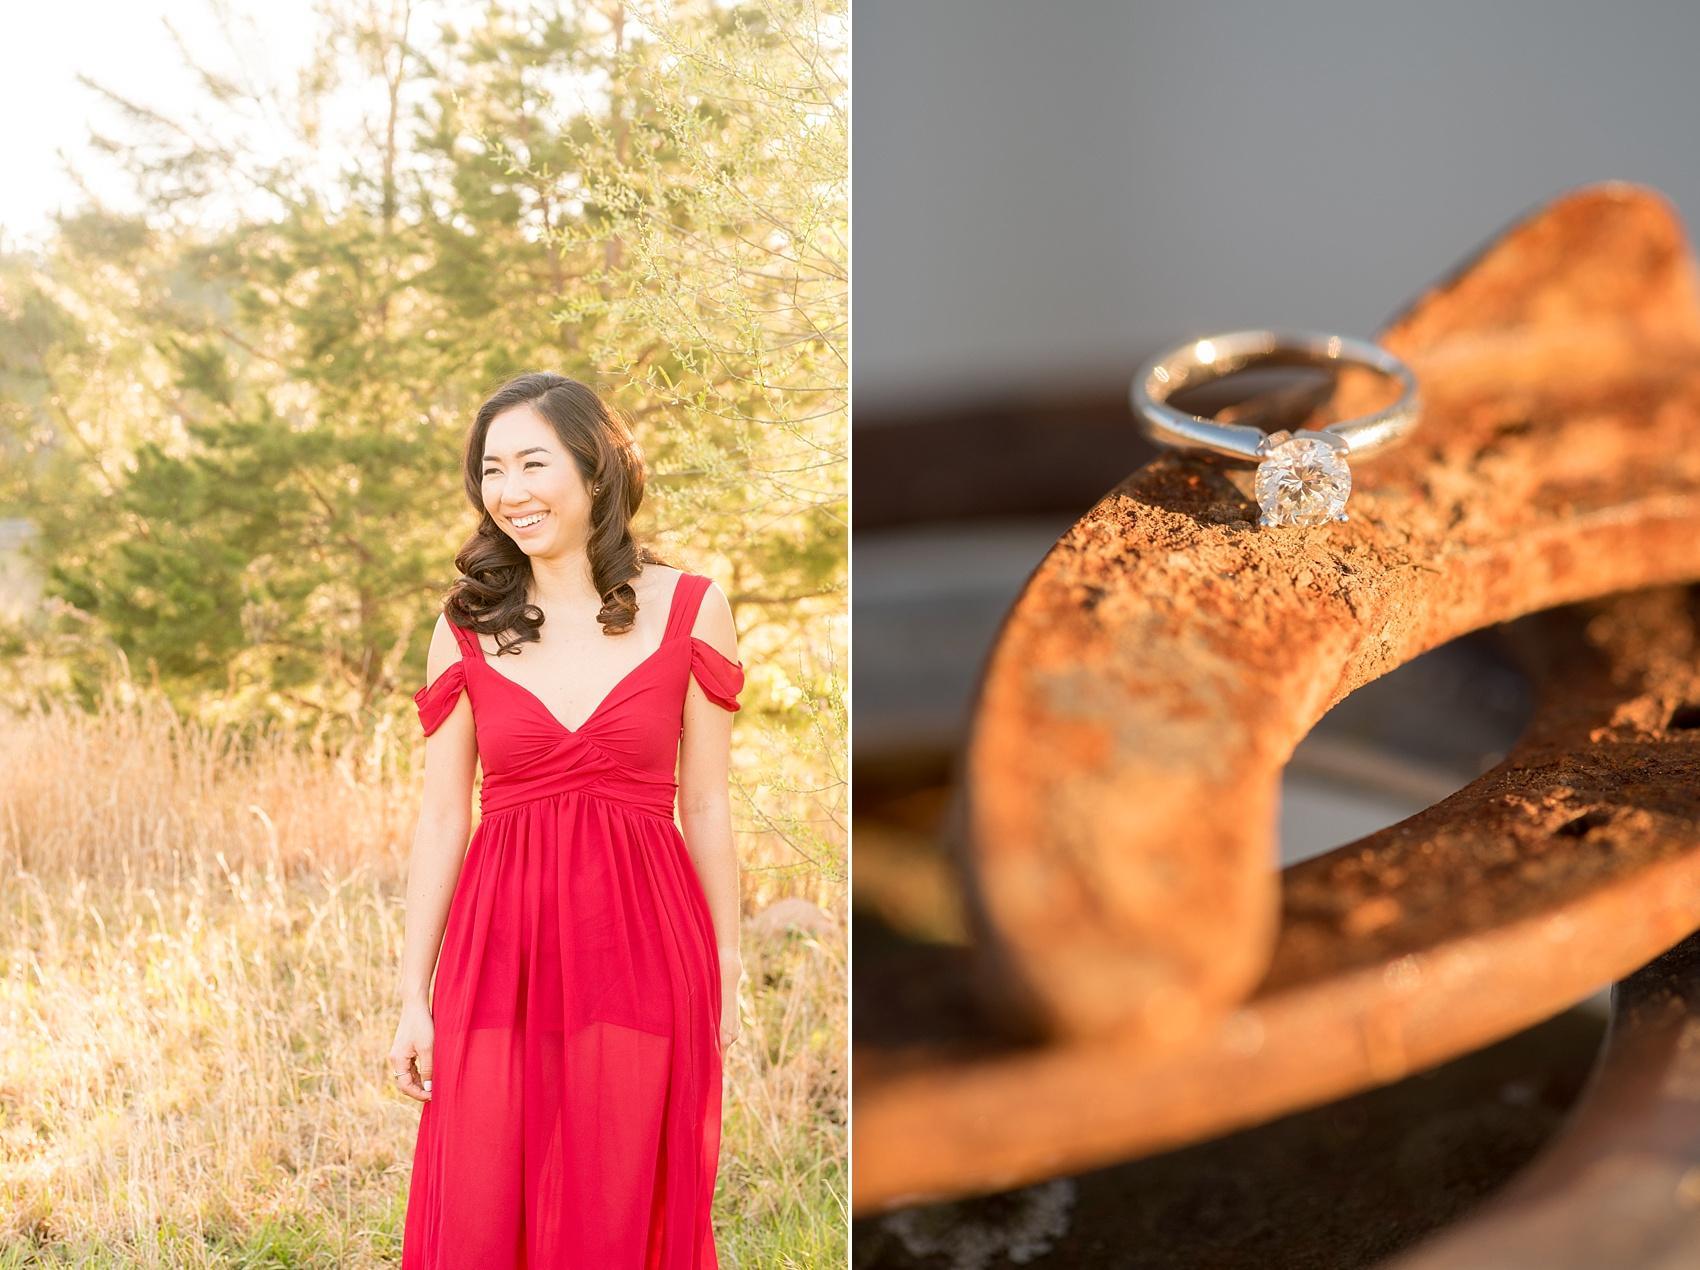 Raleigh engagement photos at Ovation Farm in Sanford by Mikkel Paige Photography. The bride wore red and the ring image was photographed on a horseshoe.